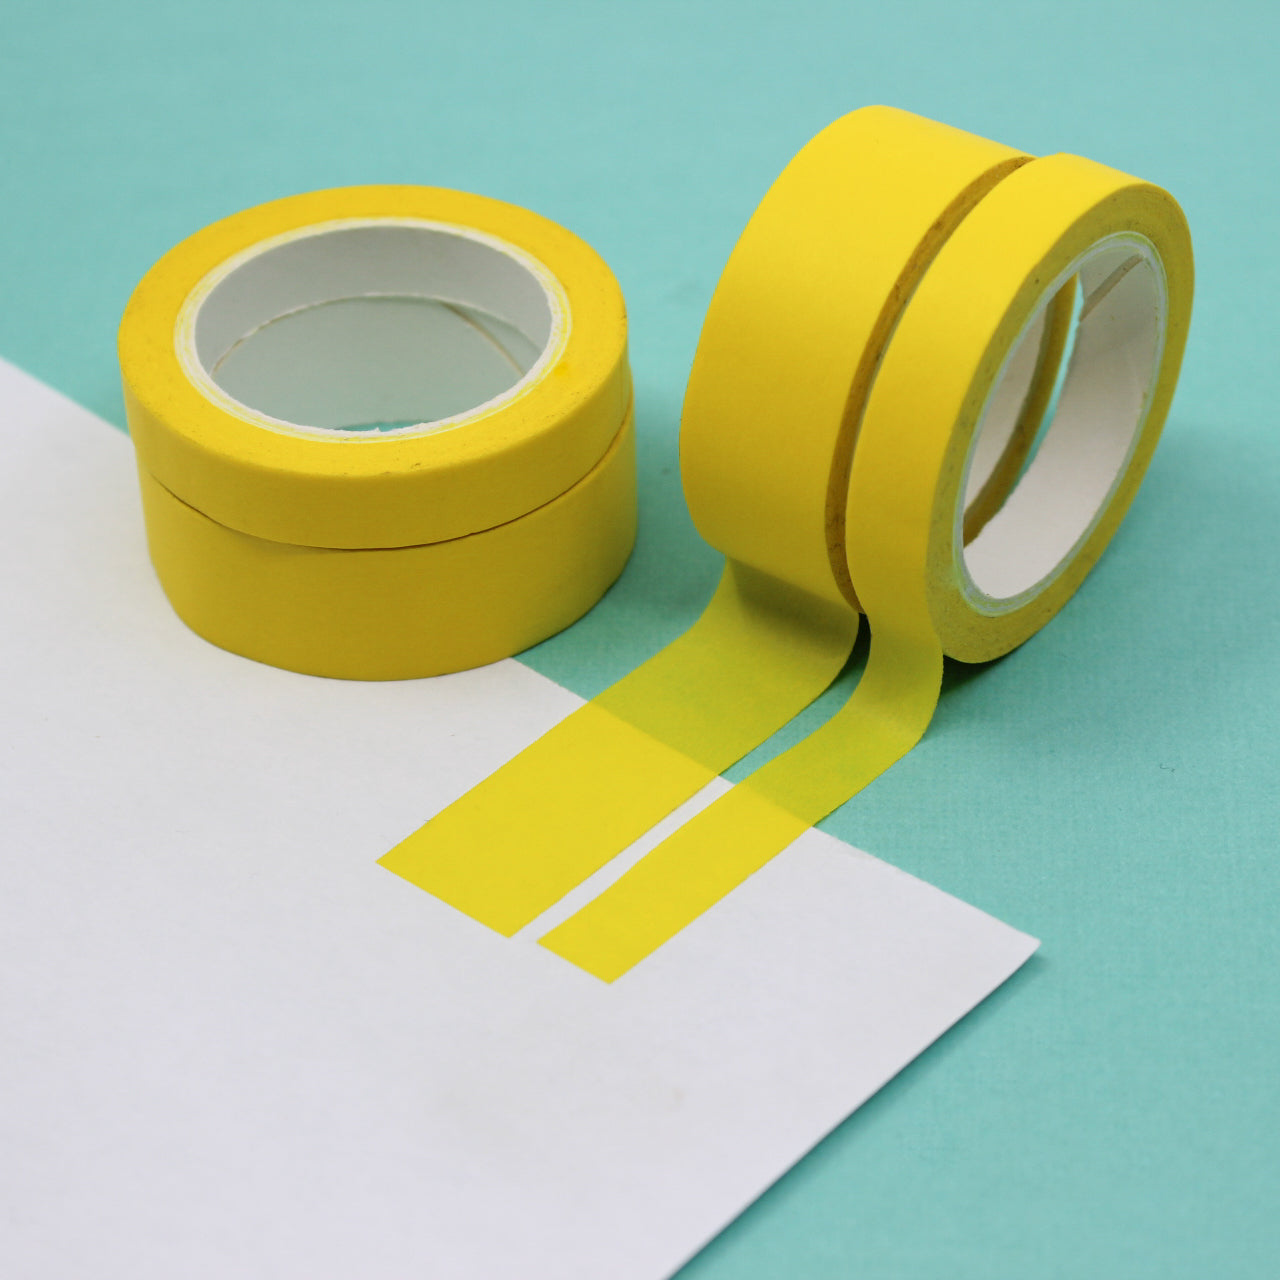 This neon yellow washi tape is vibrant and fun. This washi tape is part of our solid neon thick-thin matching duo washi collection. Find the perfect color for any project in BBB Supplies' thick-thin solids collection, from neon to neutral to pastel and more. This tape is sold at BBB Supplies Craft Shop.